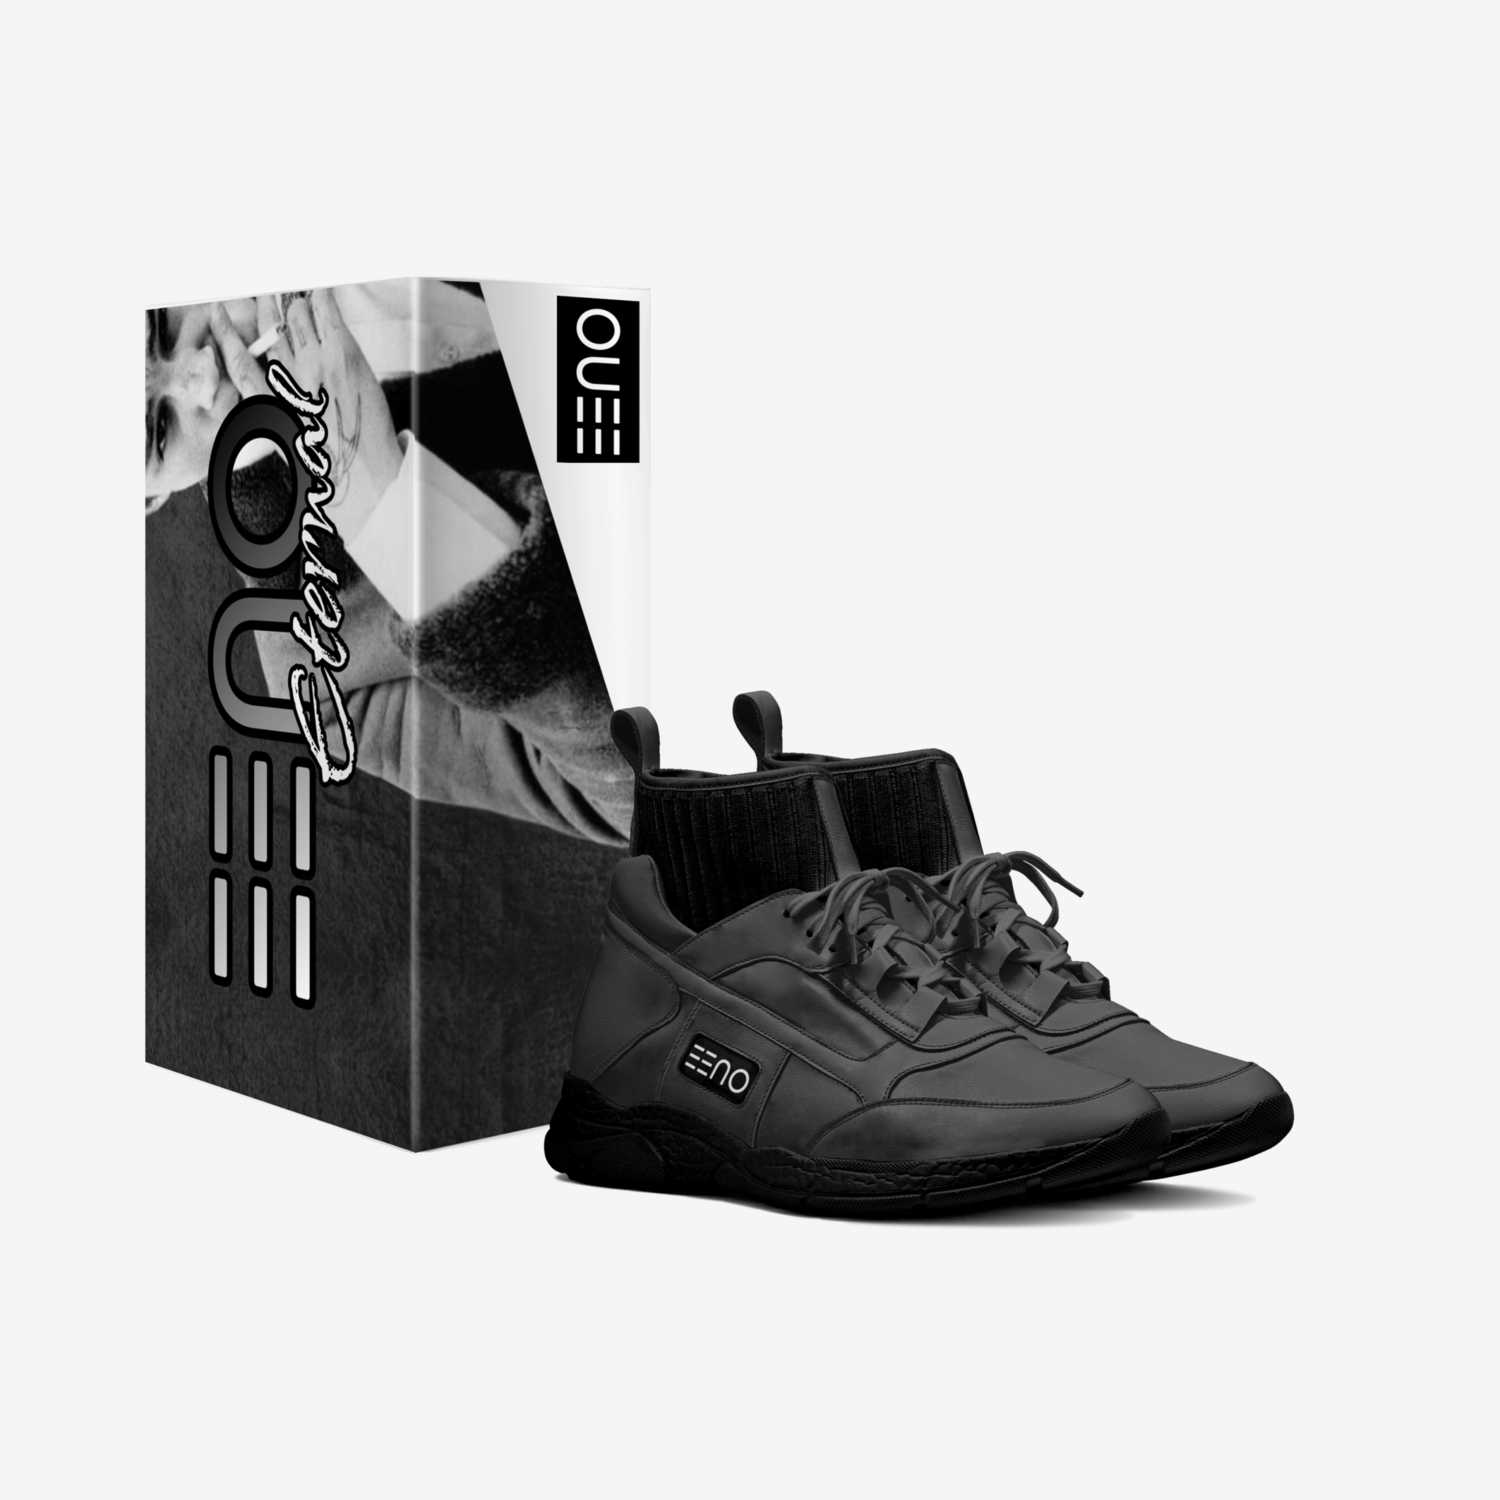 ENO ETERNAL custom made in Italy shoes by Redstar Mafia | Box view